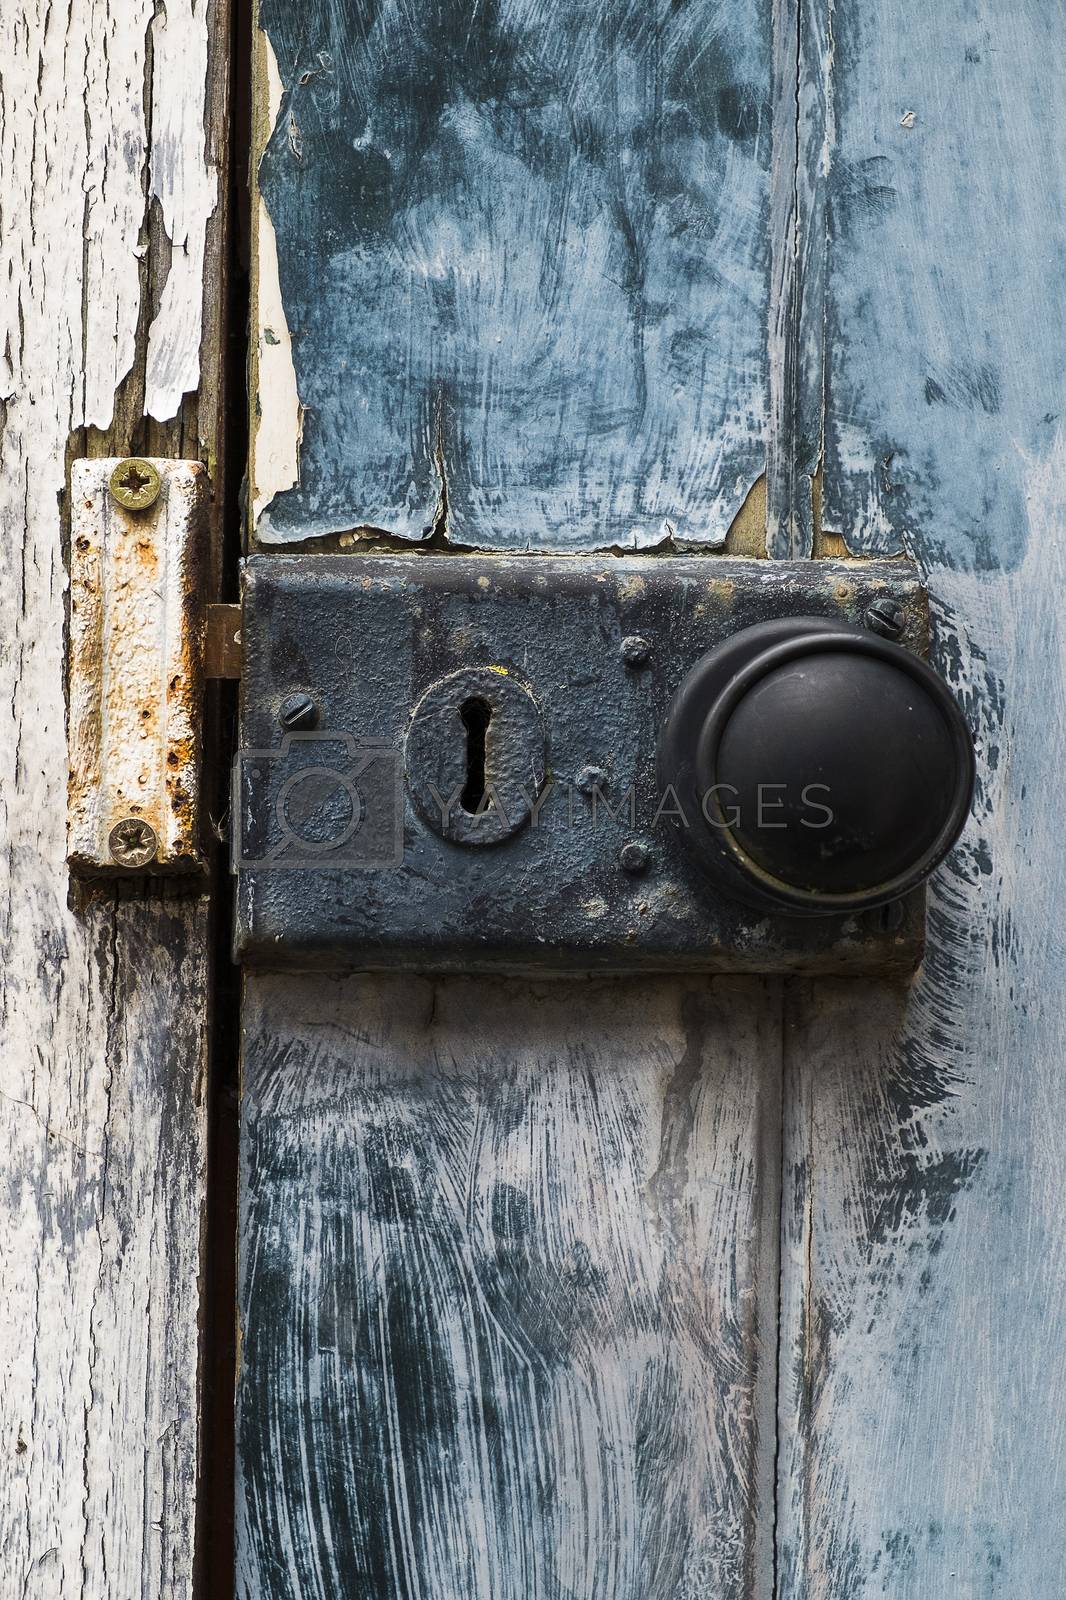 Royalty free image of weathered old lock and door by sijohnsen